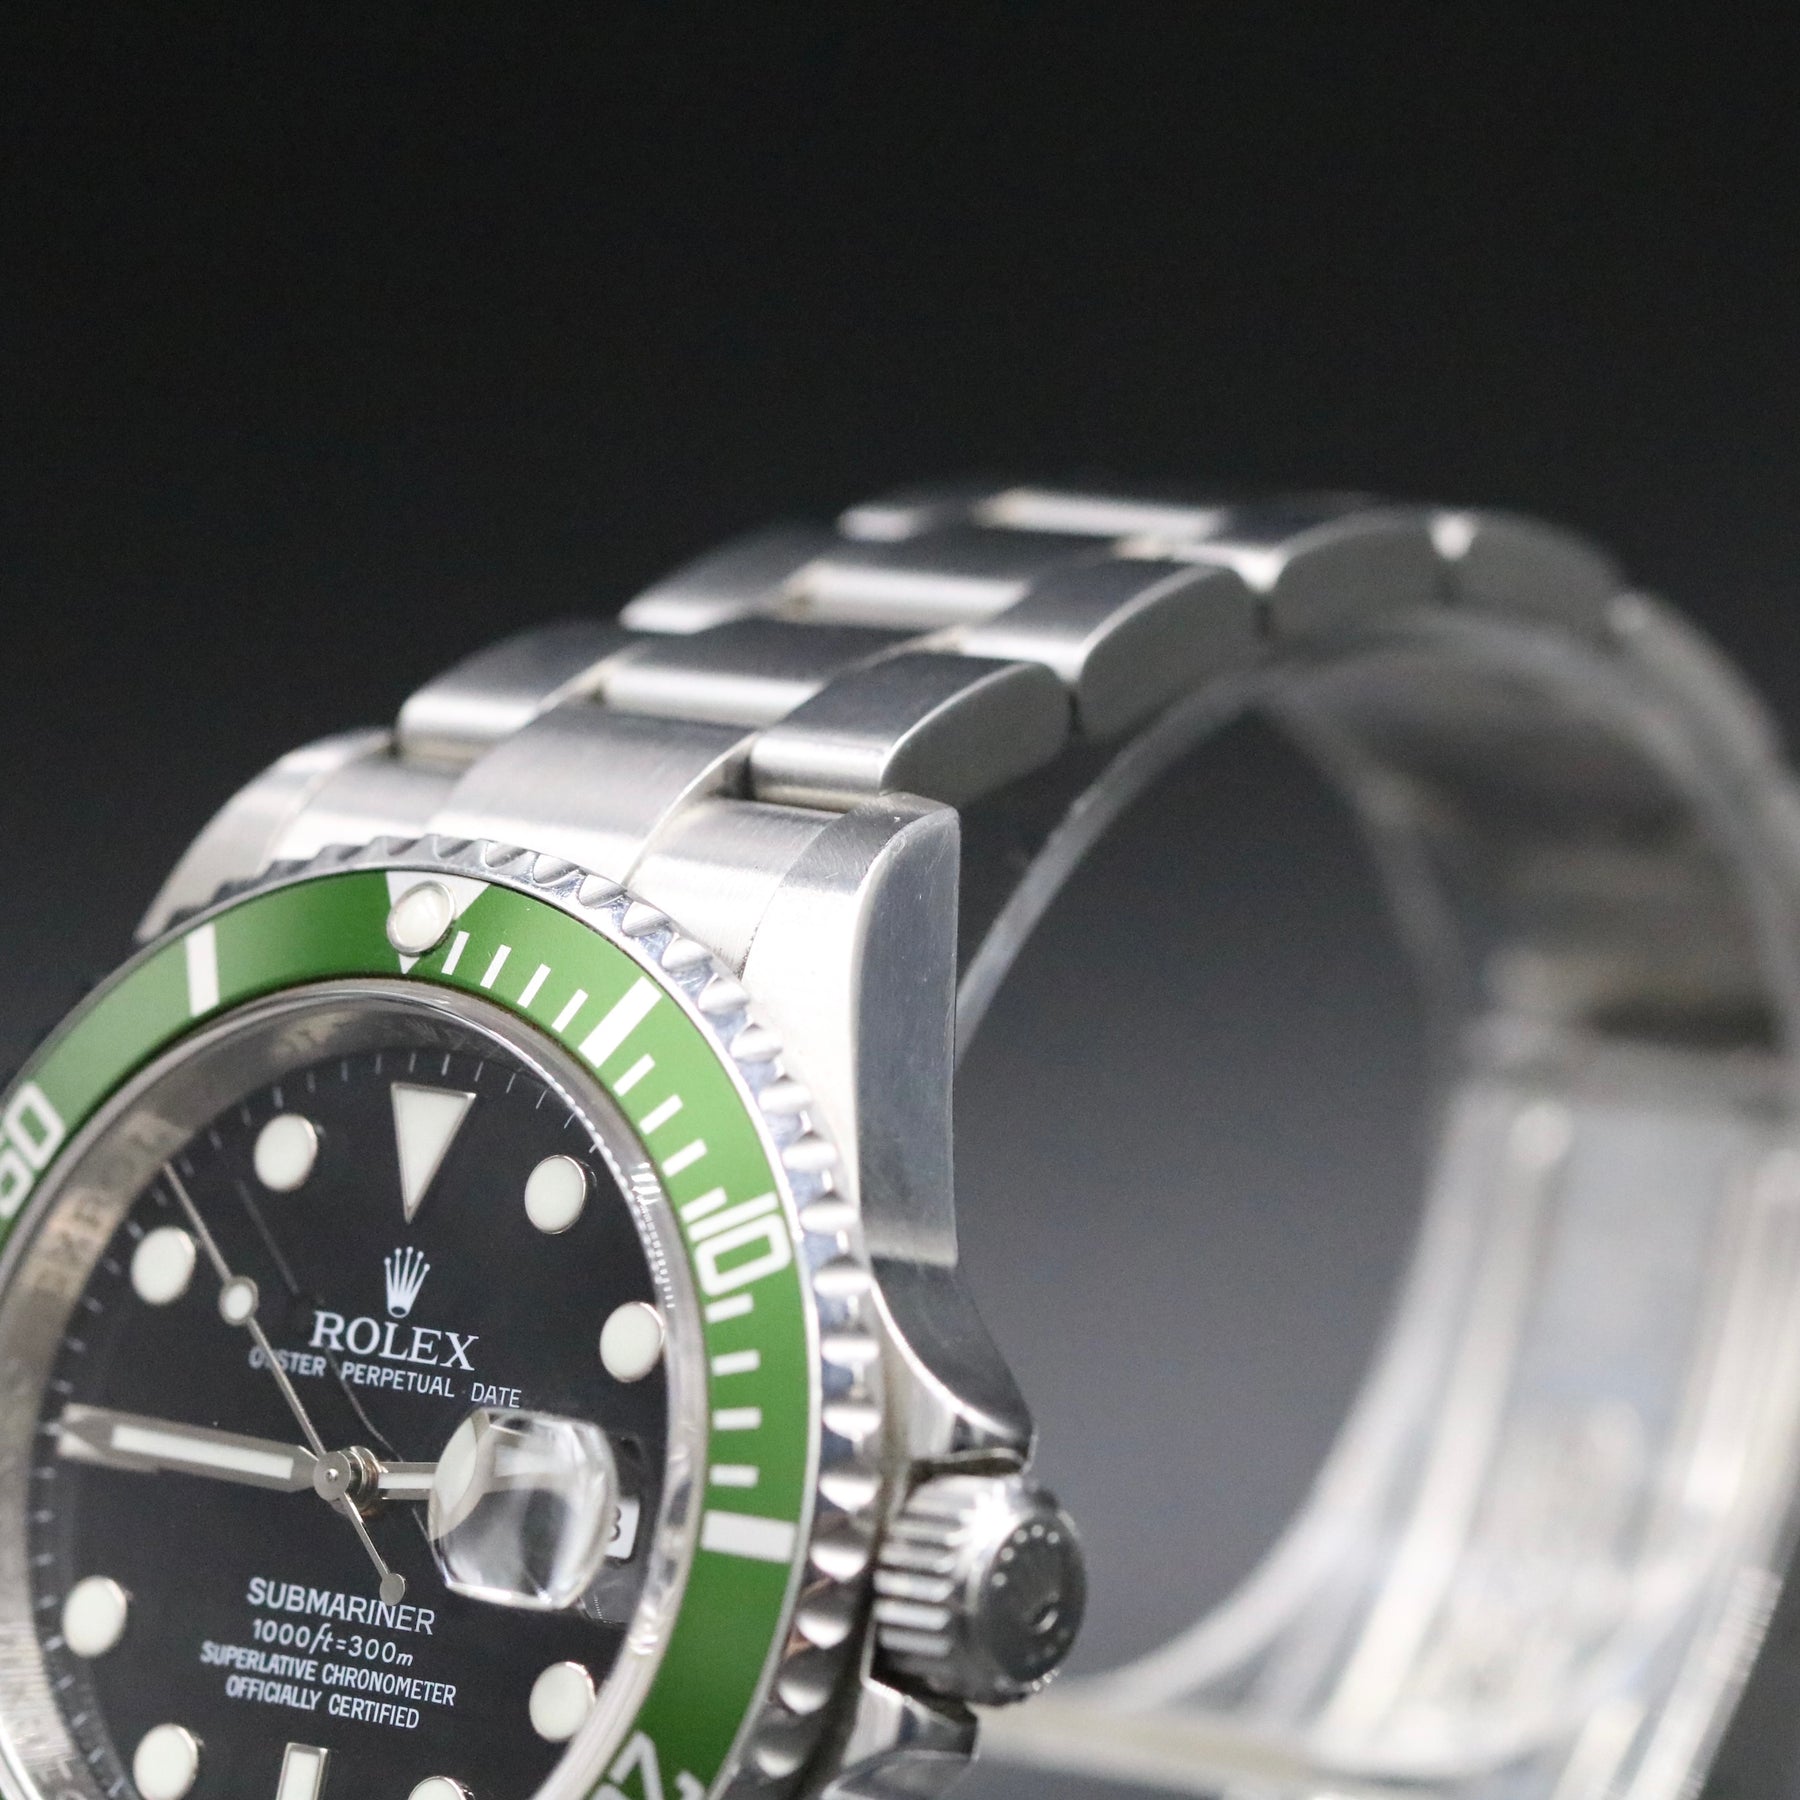 2007 Rolex 16610LV Submariner "Kermit" with Box & Papers